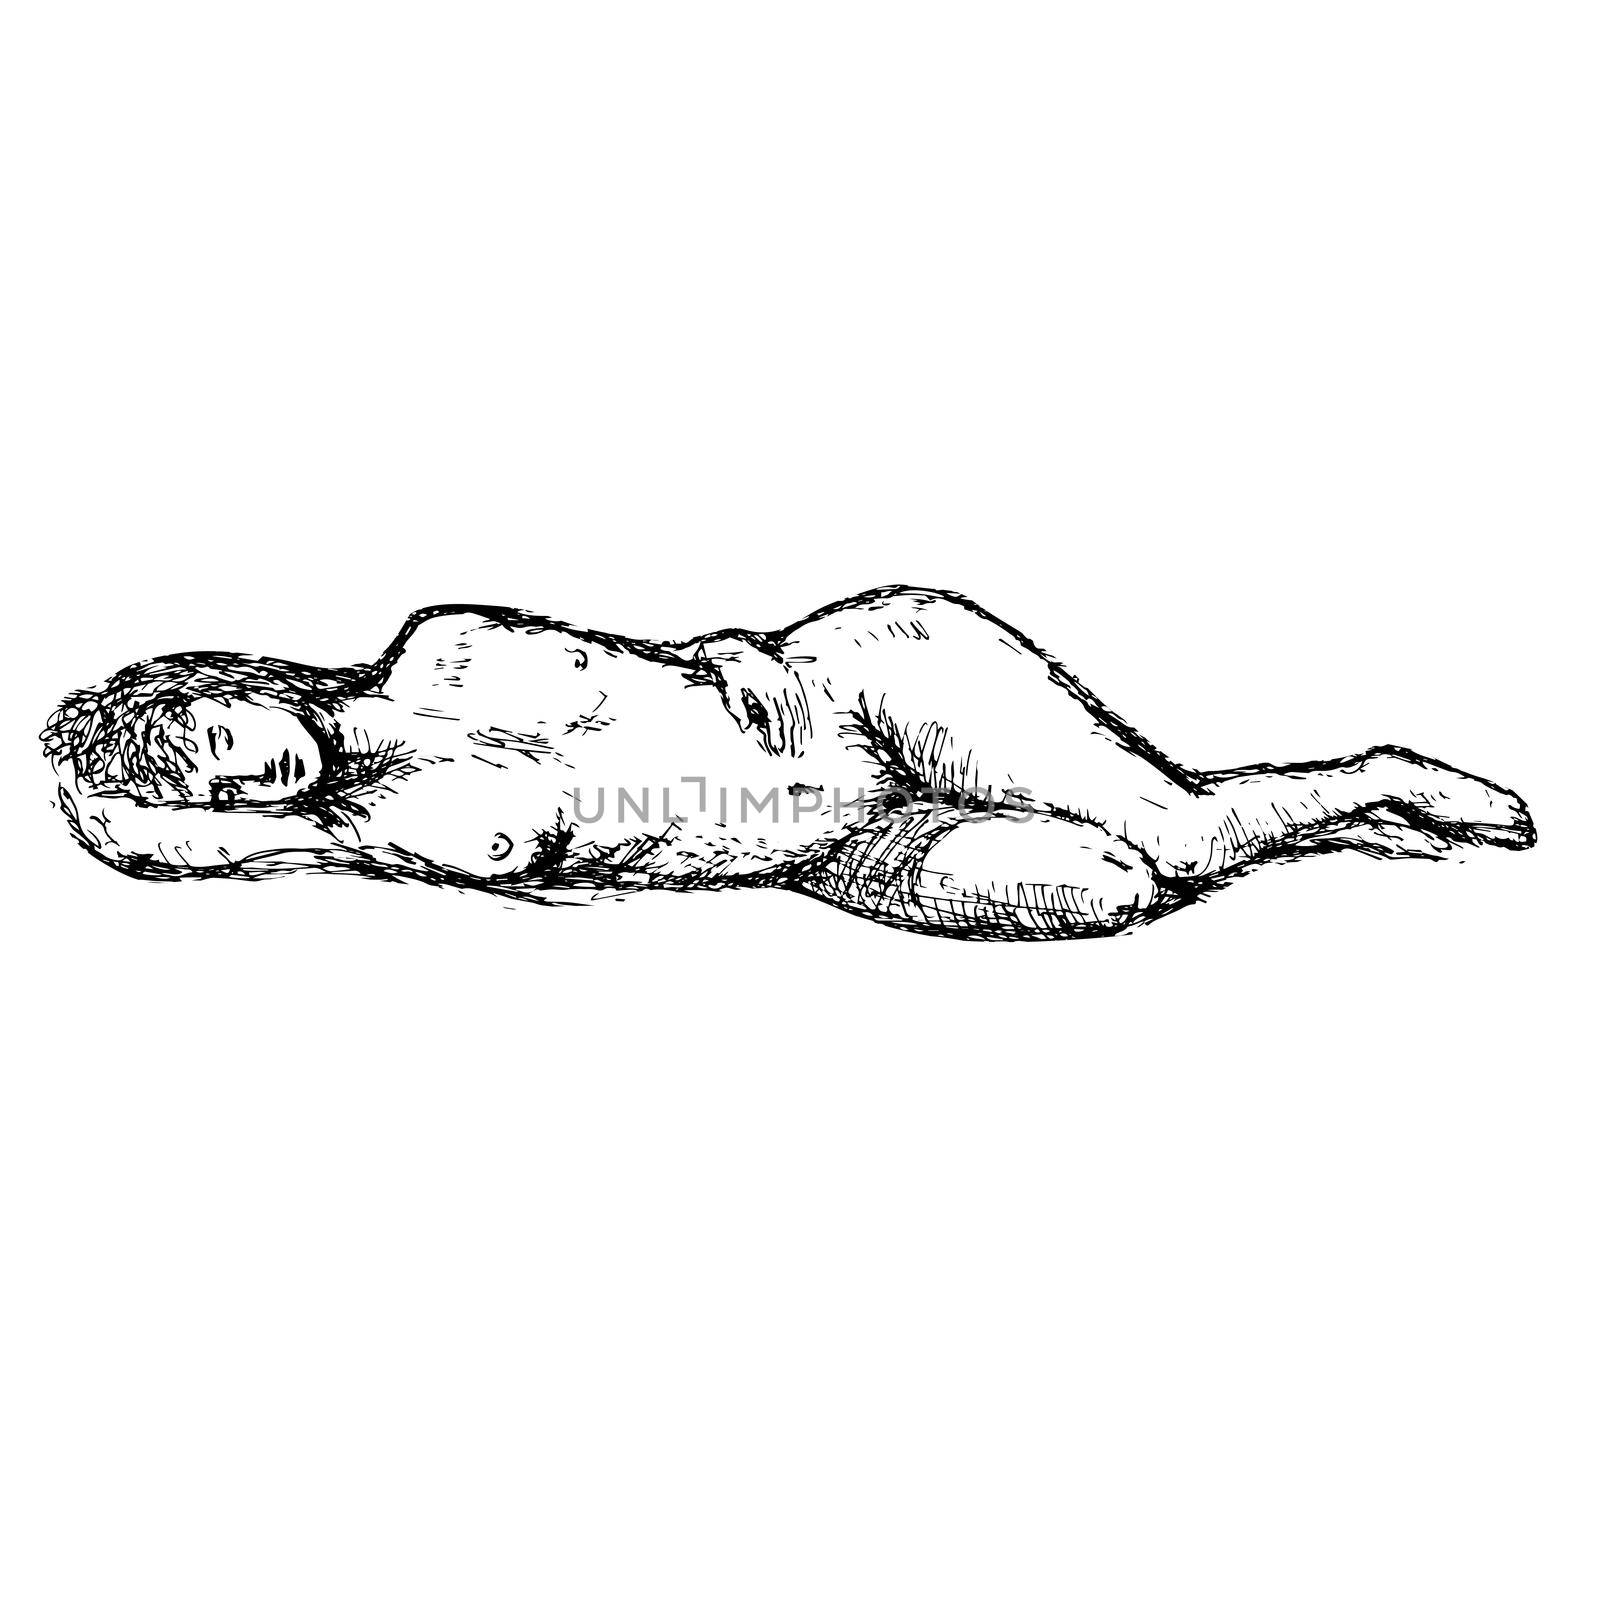 Nude Female Human Figure Model Posing Reclining, Supine Pose or Lying Down Doodle Art Continuous Line Drawing  by patrimonio